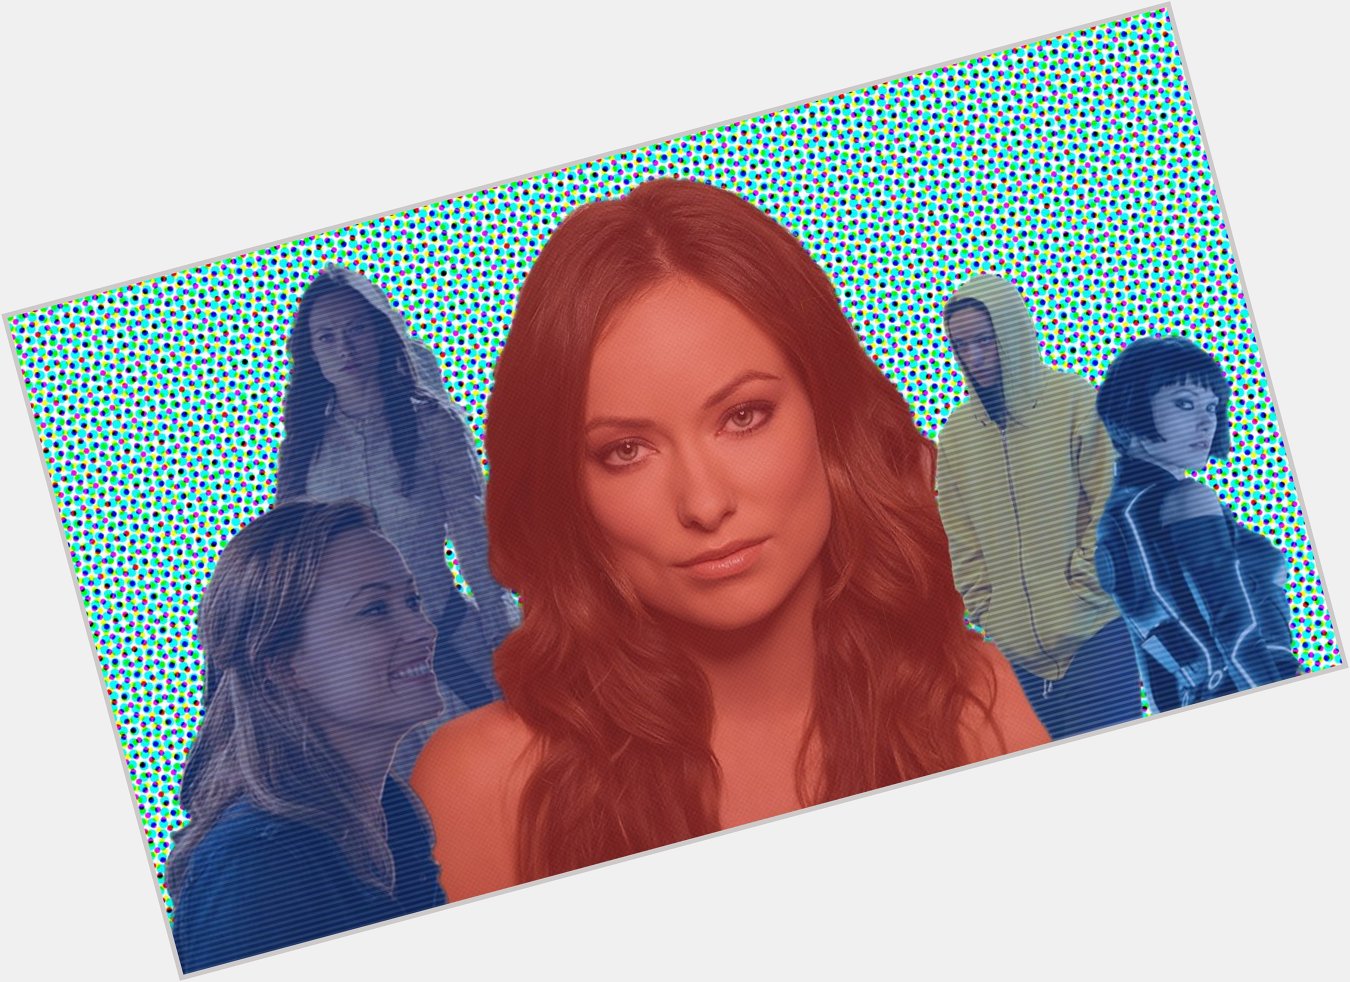 Happy Birthday Olivia Wilde! We loved her role in Meadowland. What was your favorite character she played? 